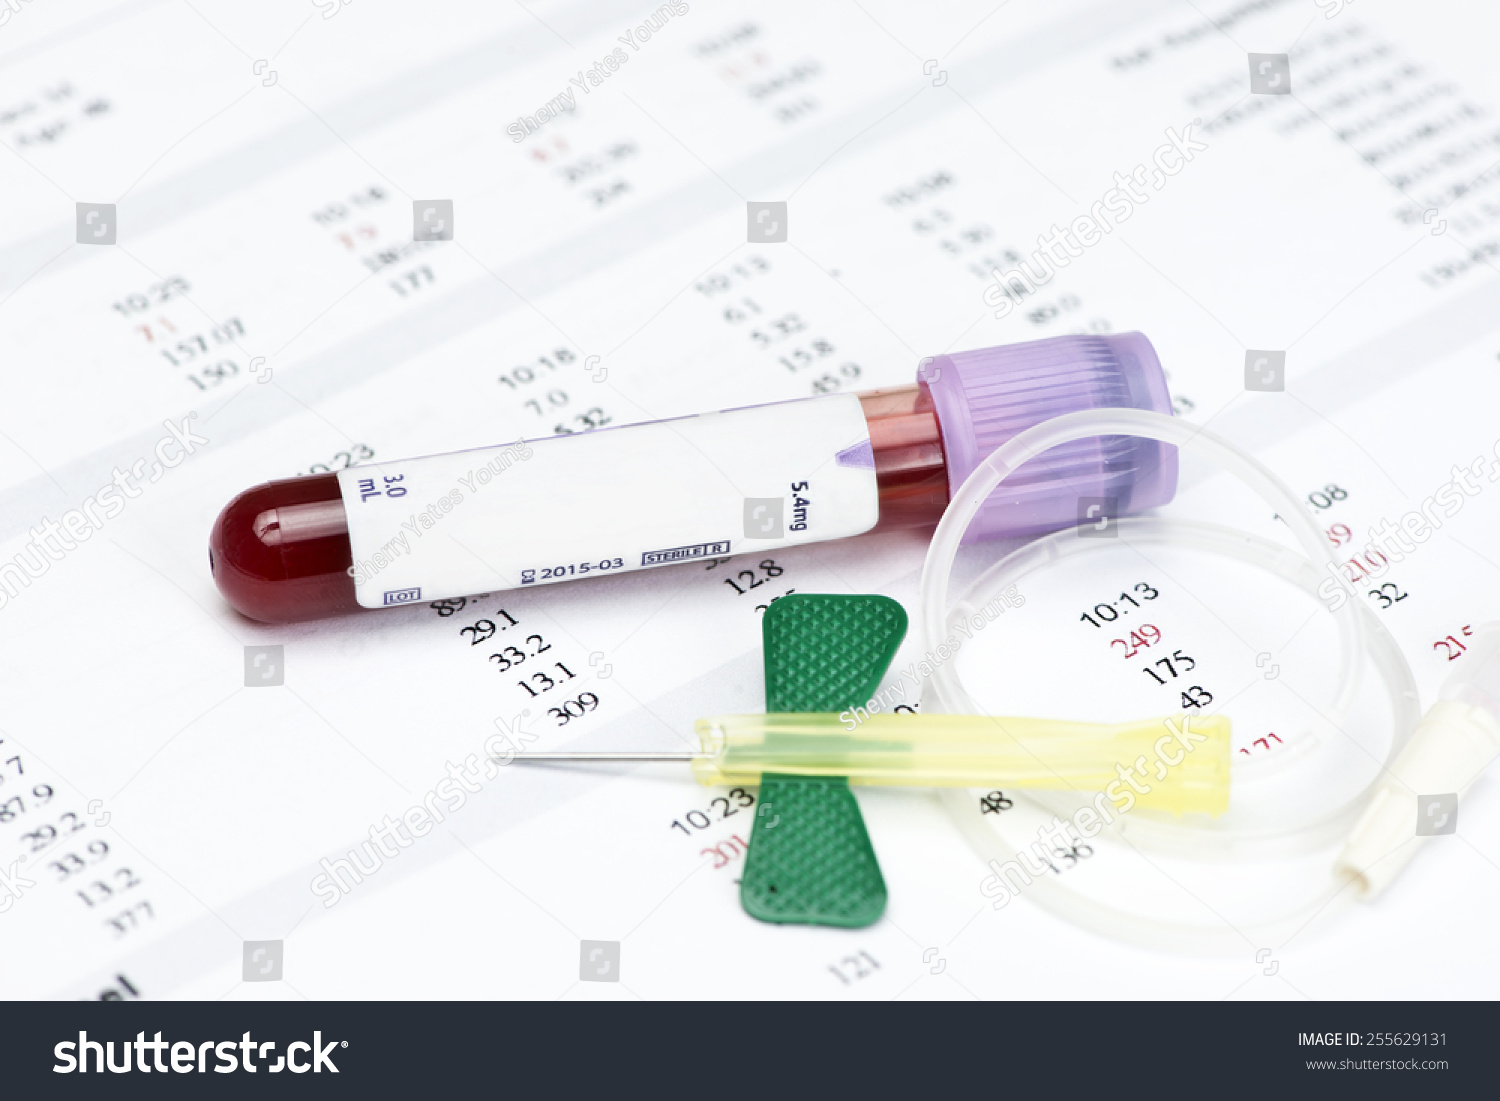 Blood Sample In Lavender Collection Tube With Catheter And Hematology ...